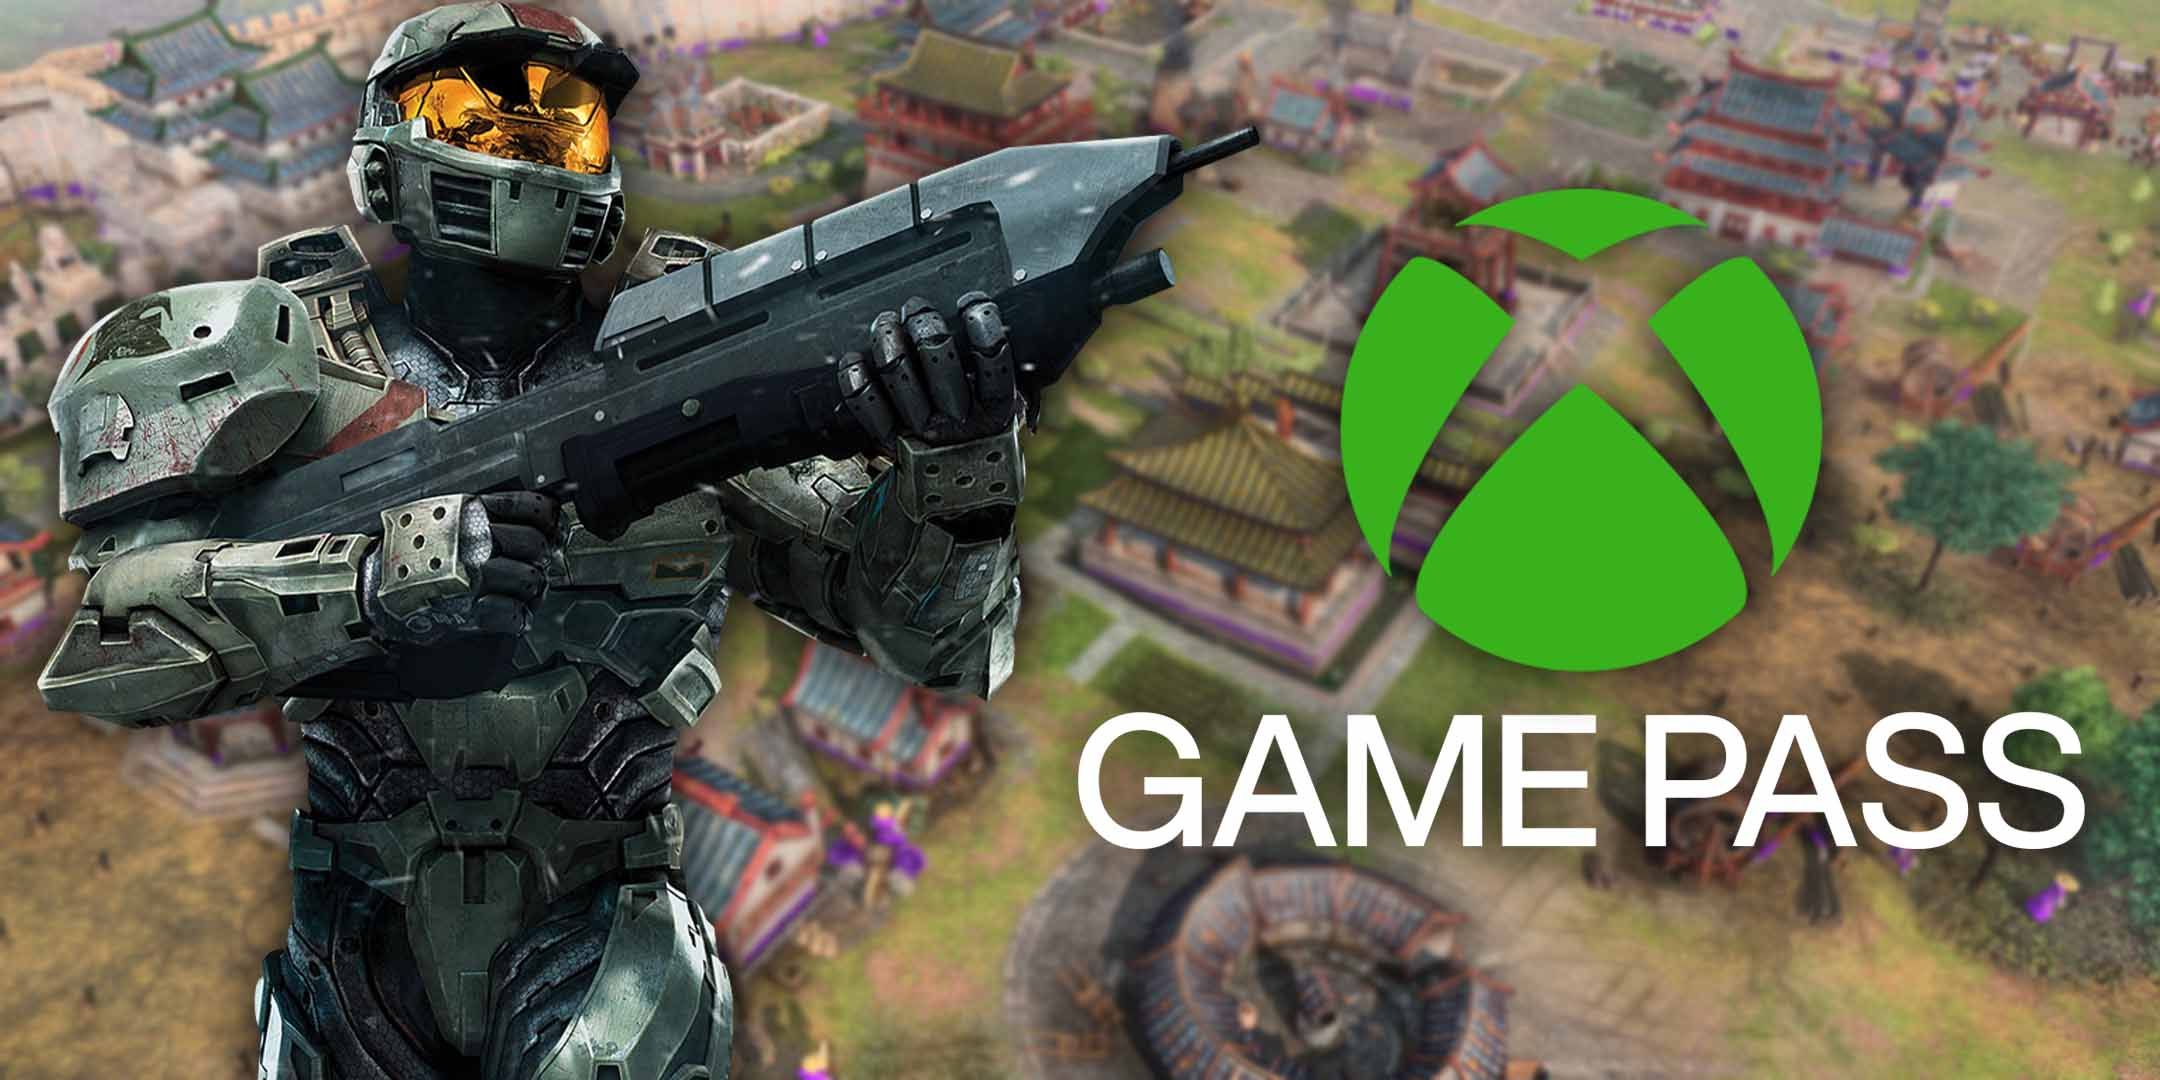 Halo Wars promo art with the words 'Xbox Game Pass'